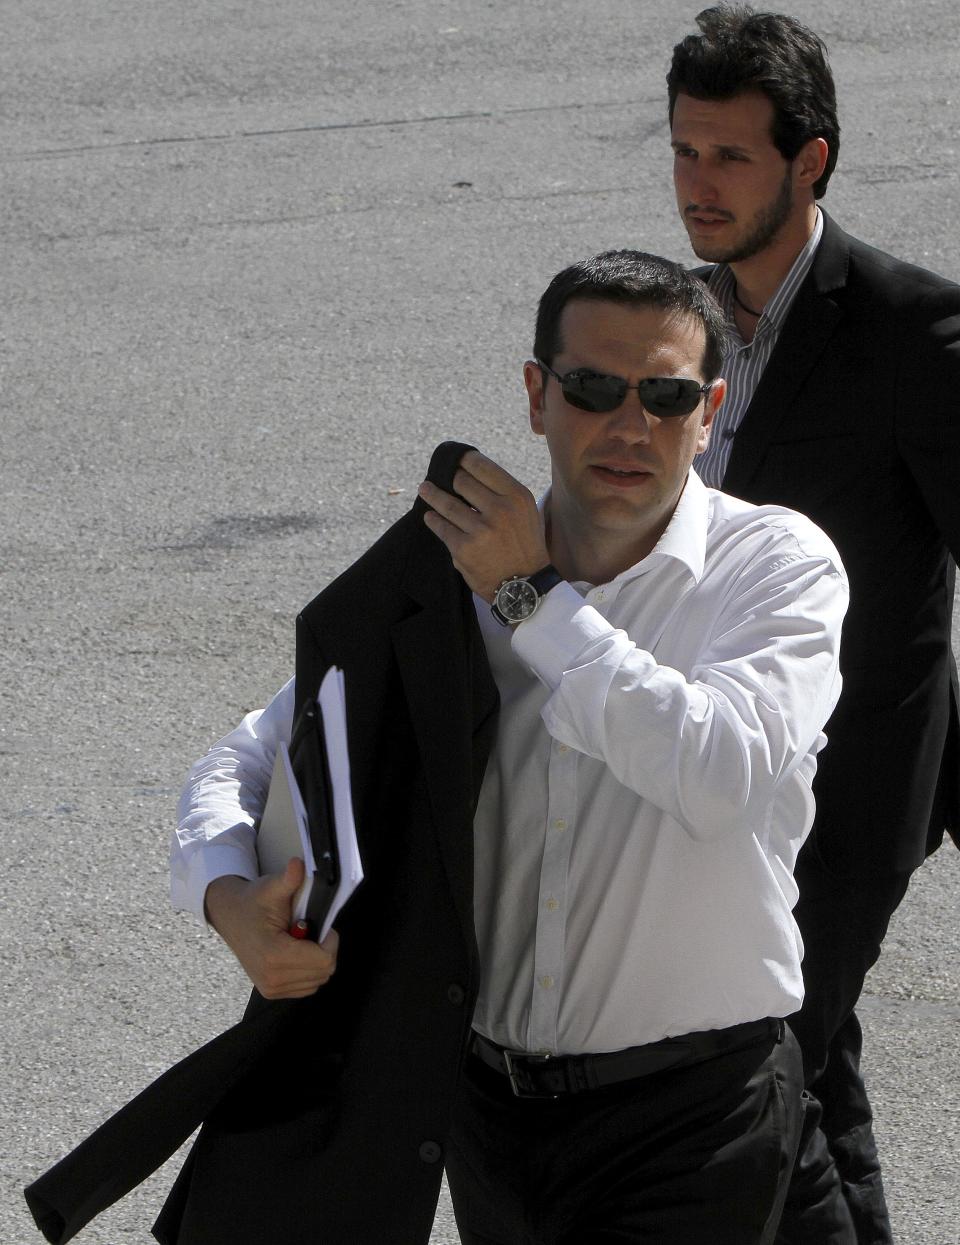 Head of Greece's radical left-wing Syriza party Alexis Tsipras arrives at Zappeio Conference Hall following his statement in Athens, Tuesday, June 12, 2012. Tsipras, whose party came a surprise second in inconclusive May 6 elections, said he would stick to his pledge to tear up Greece's bailout deal, saying the austerity the country has been forced to impose in return for billions of euros in rescue loans was leading Greece towards collapse. (AP Photo/Petros Karadjias)